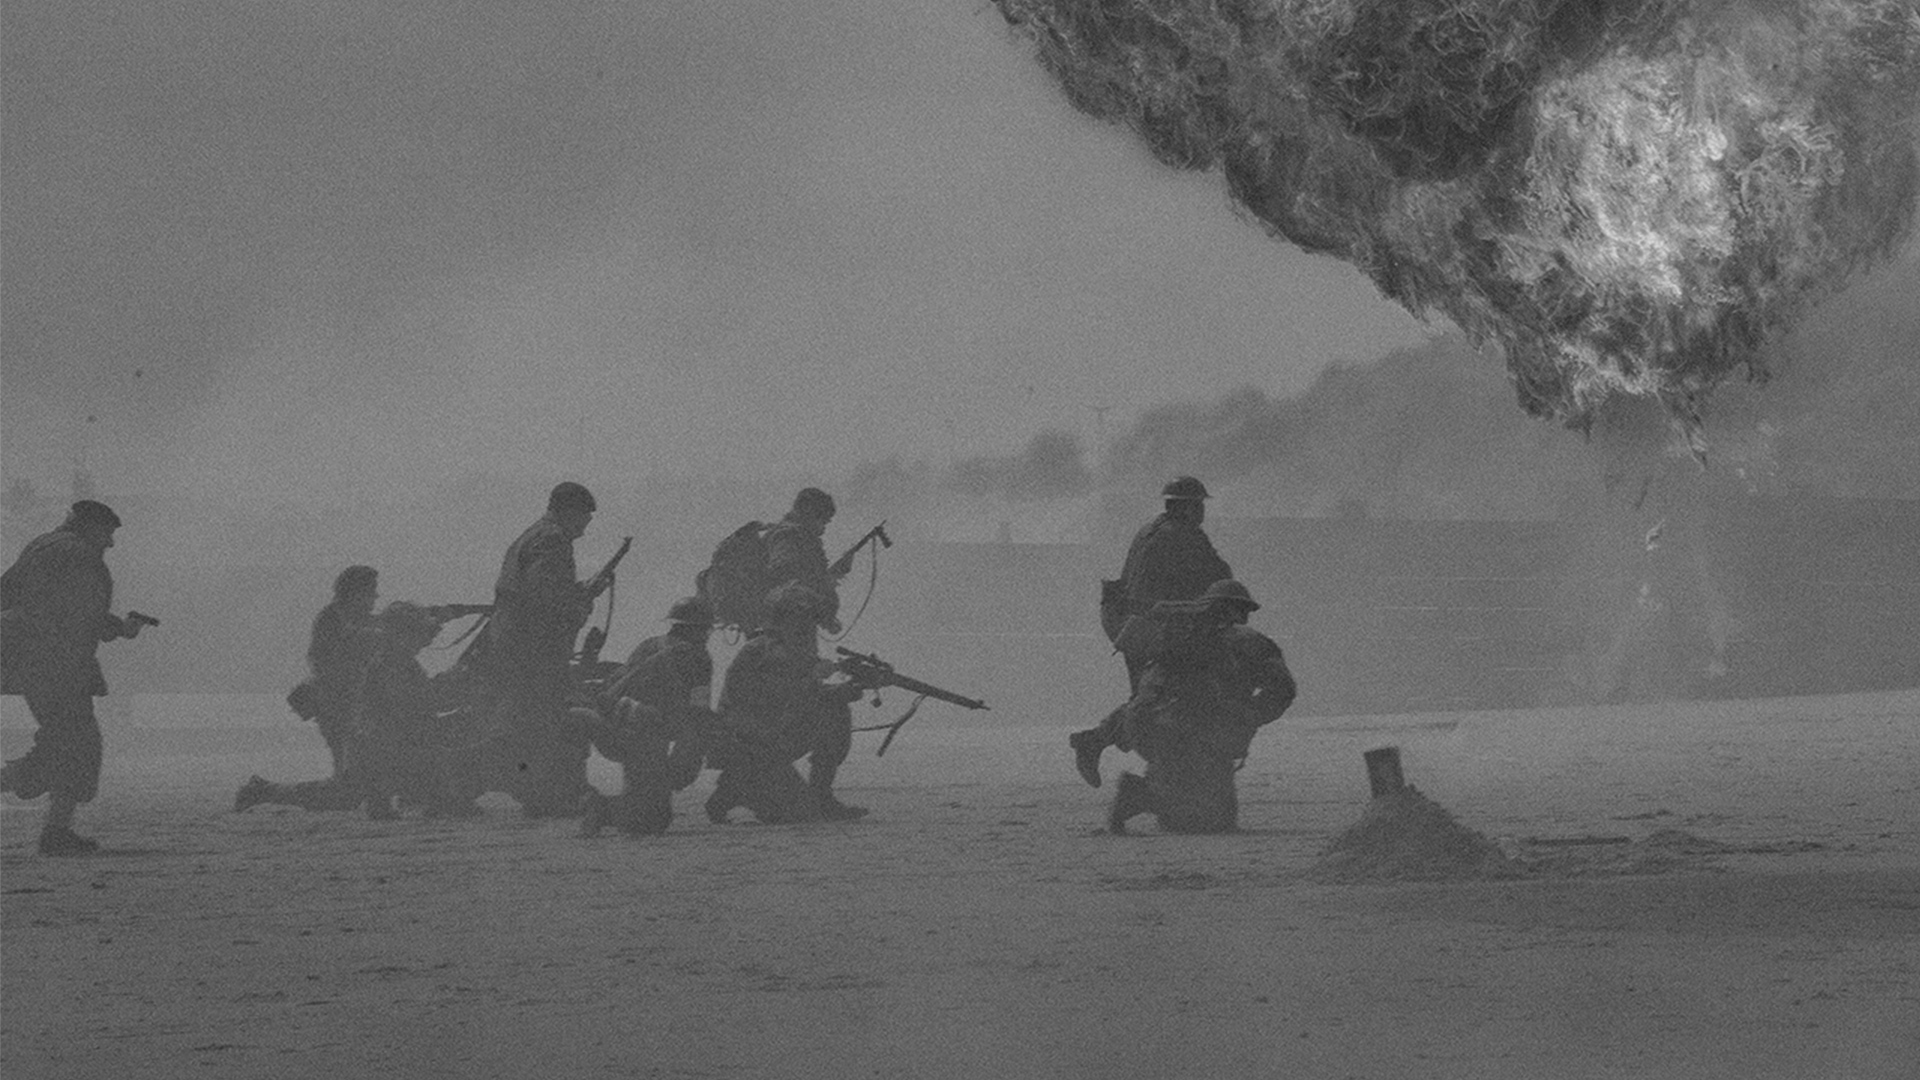 Silhouette of soldiers at war